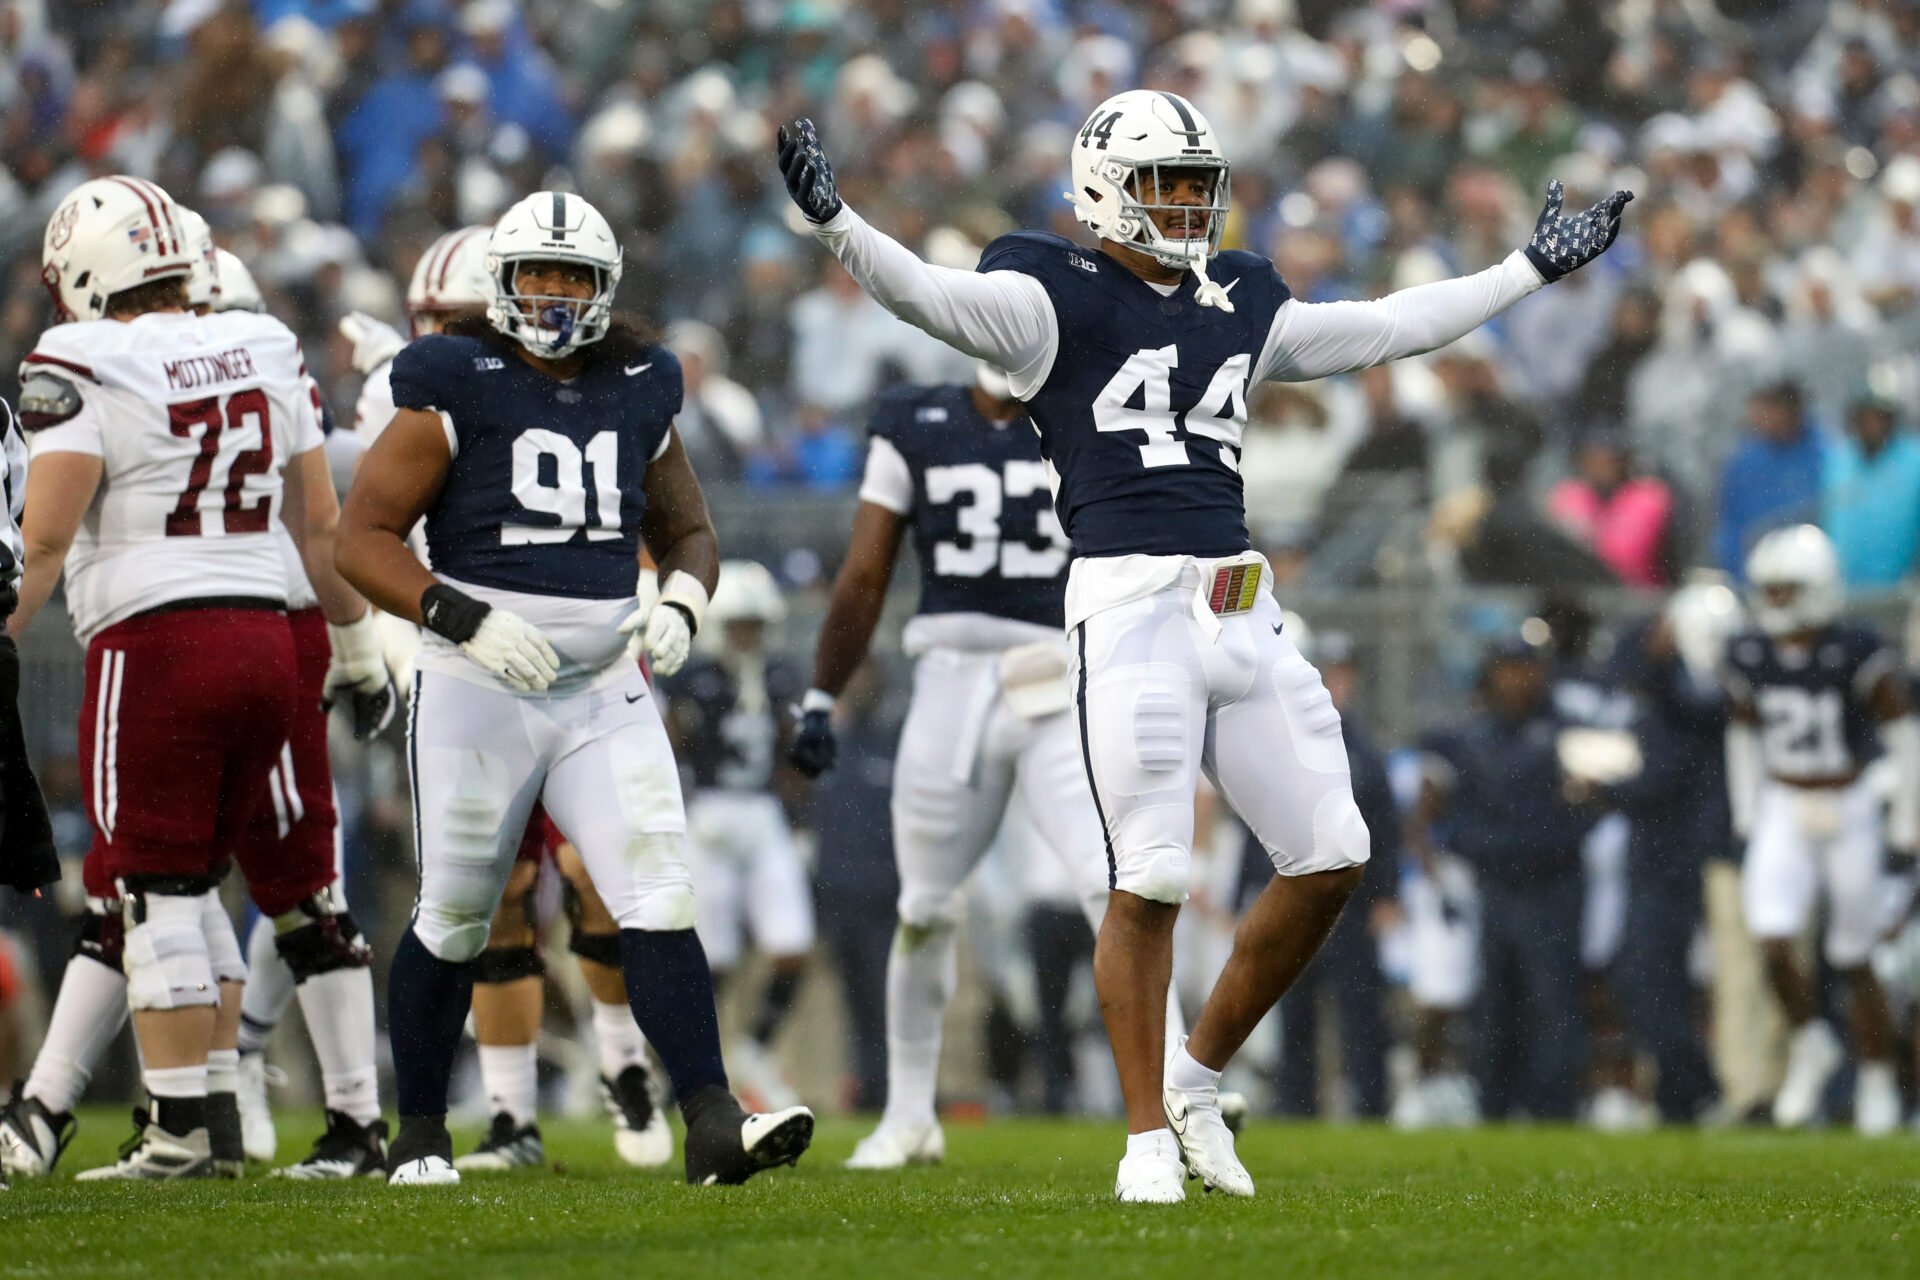 How Minnesota Became Penn State's White Out Game Opponent